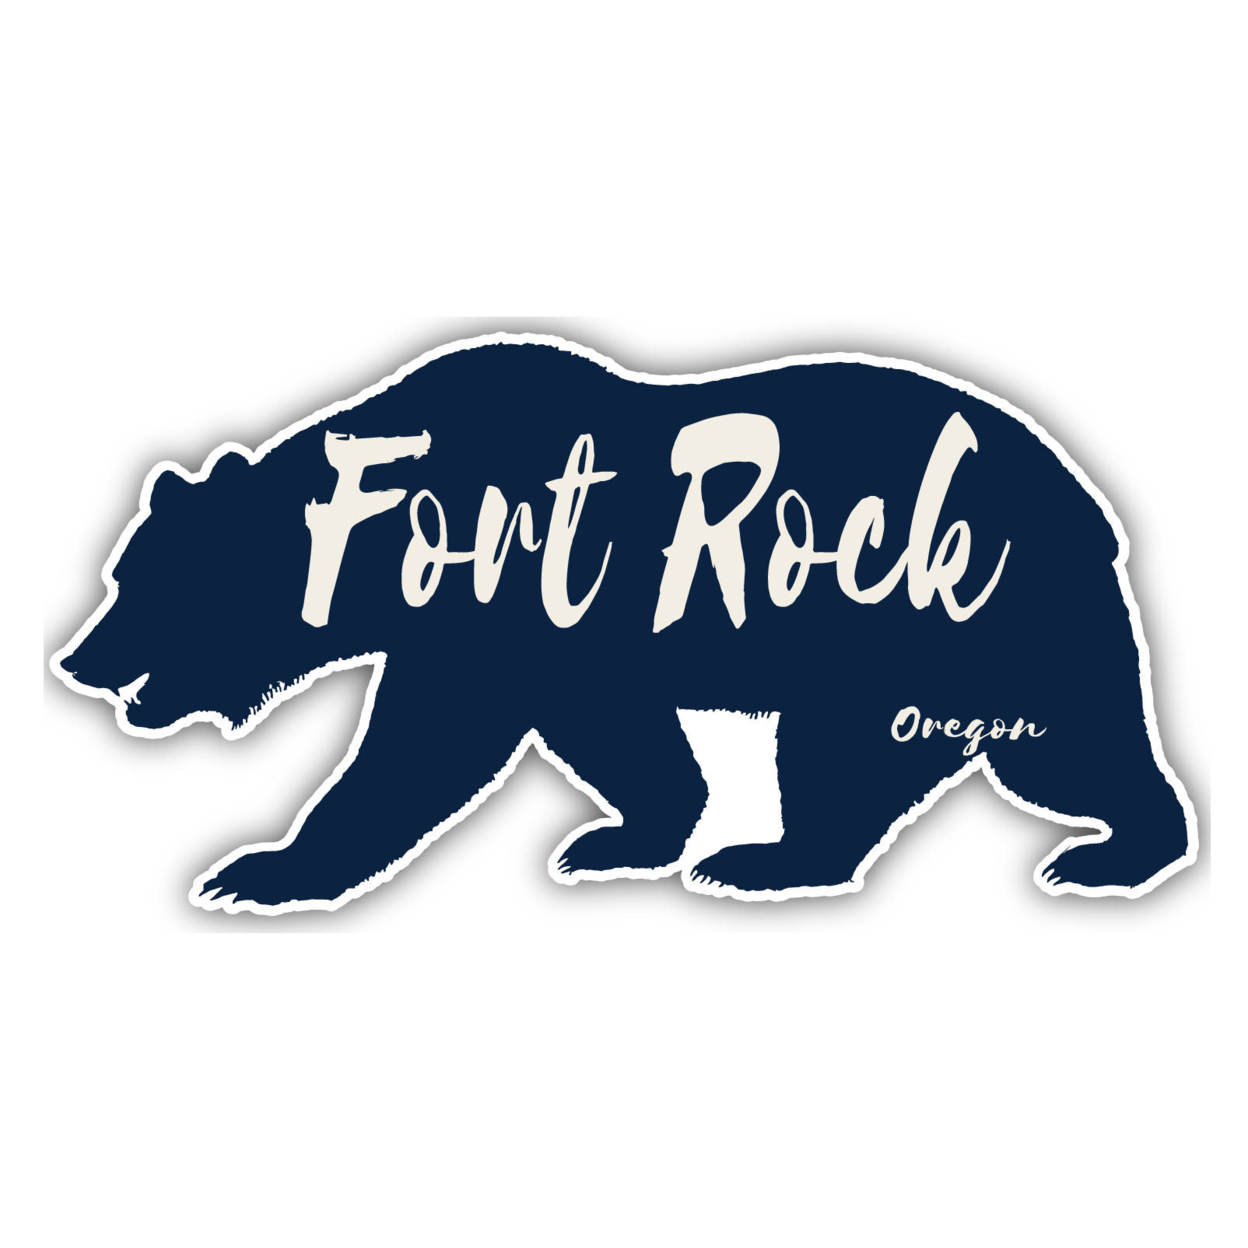 Fort Rock Oregon Souvenir Decorative Stickers (Choose Theme And Size) - 4-Pack, 4-Inch, Bear